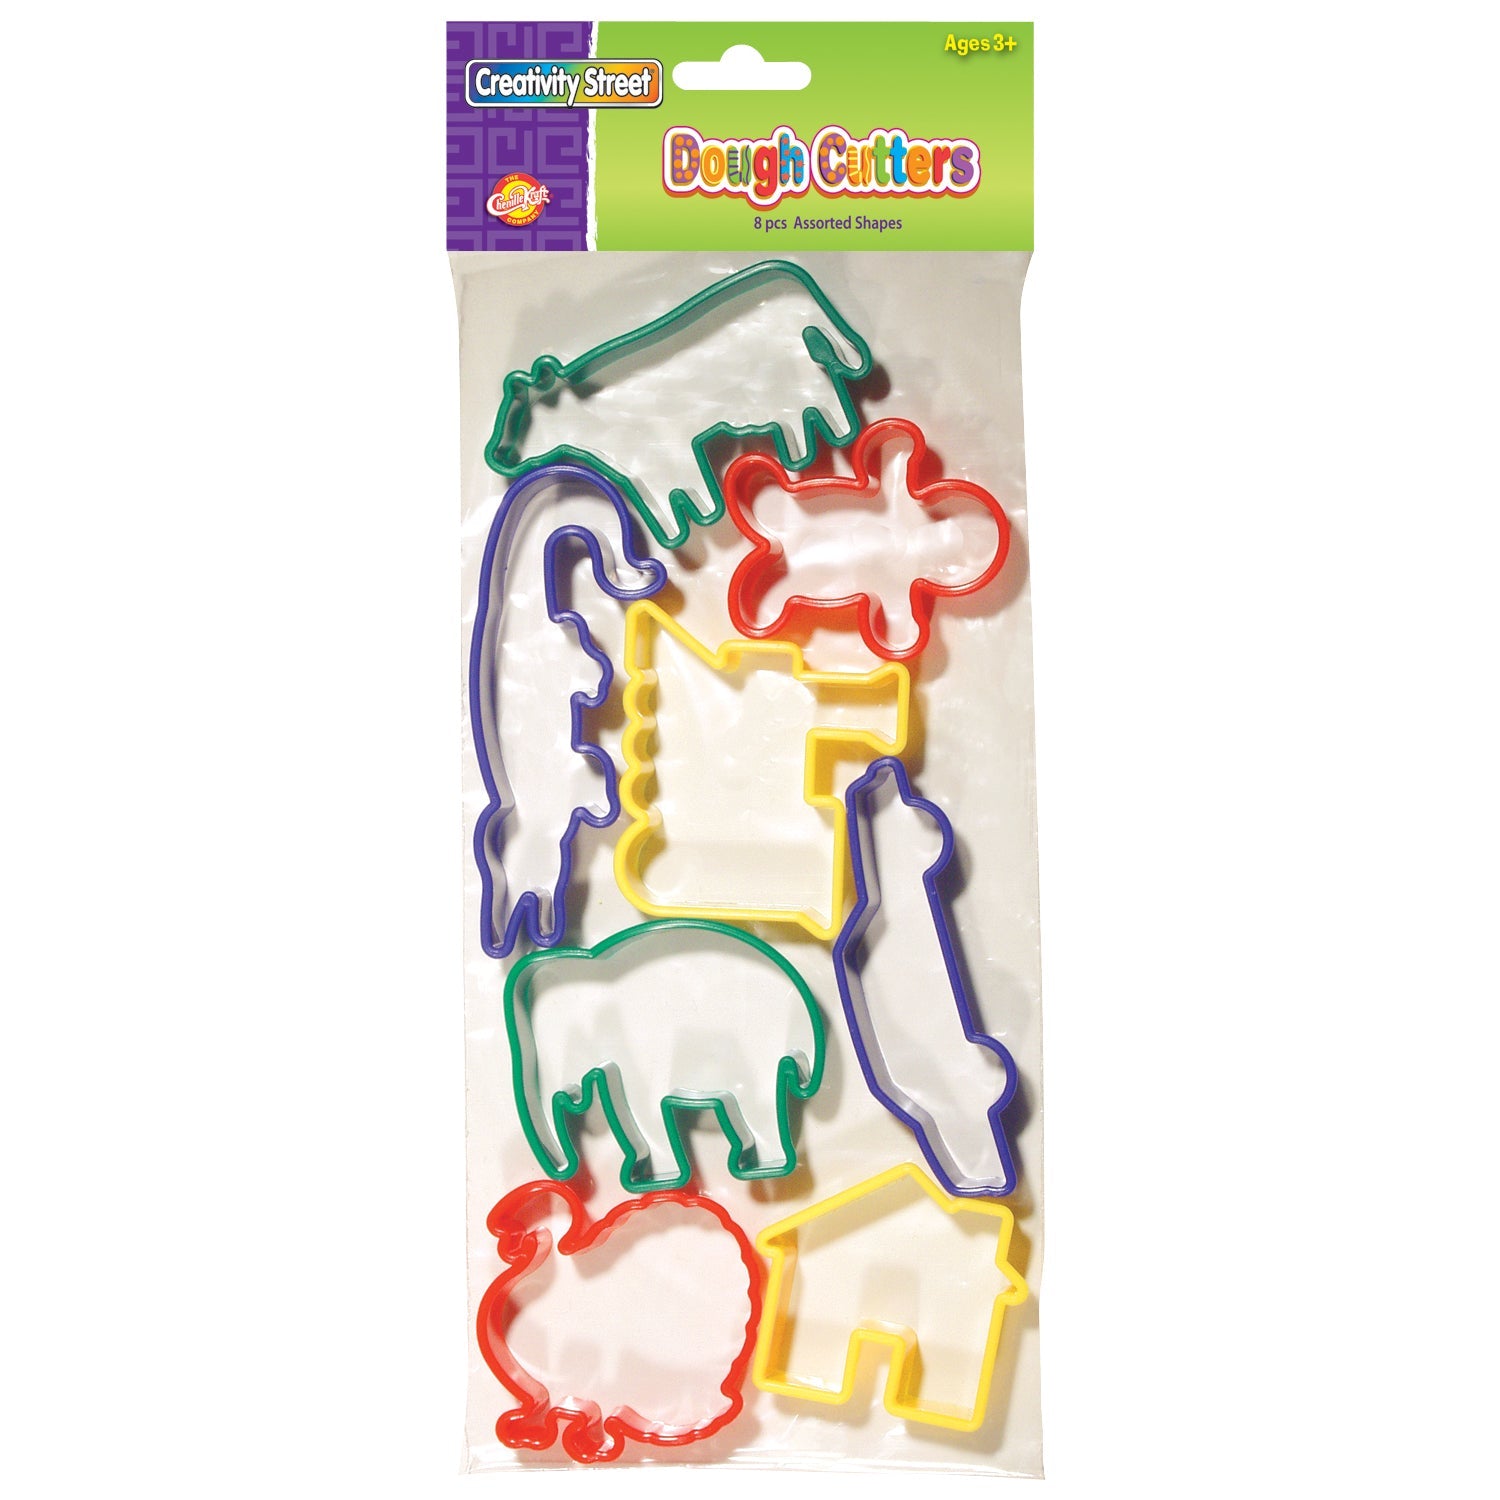 Dough Cutters - 8 Assorted Shapes with Animals